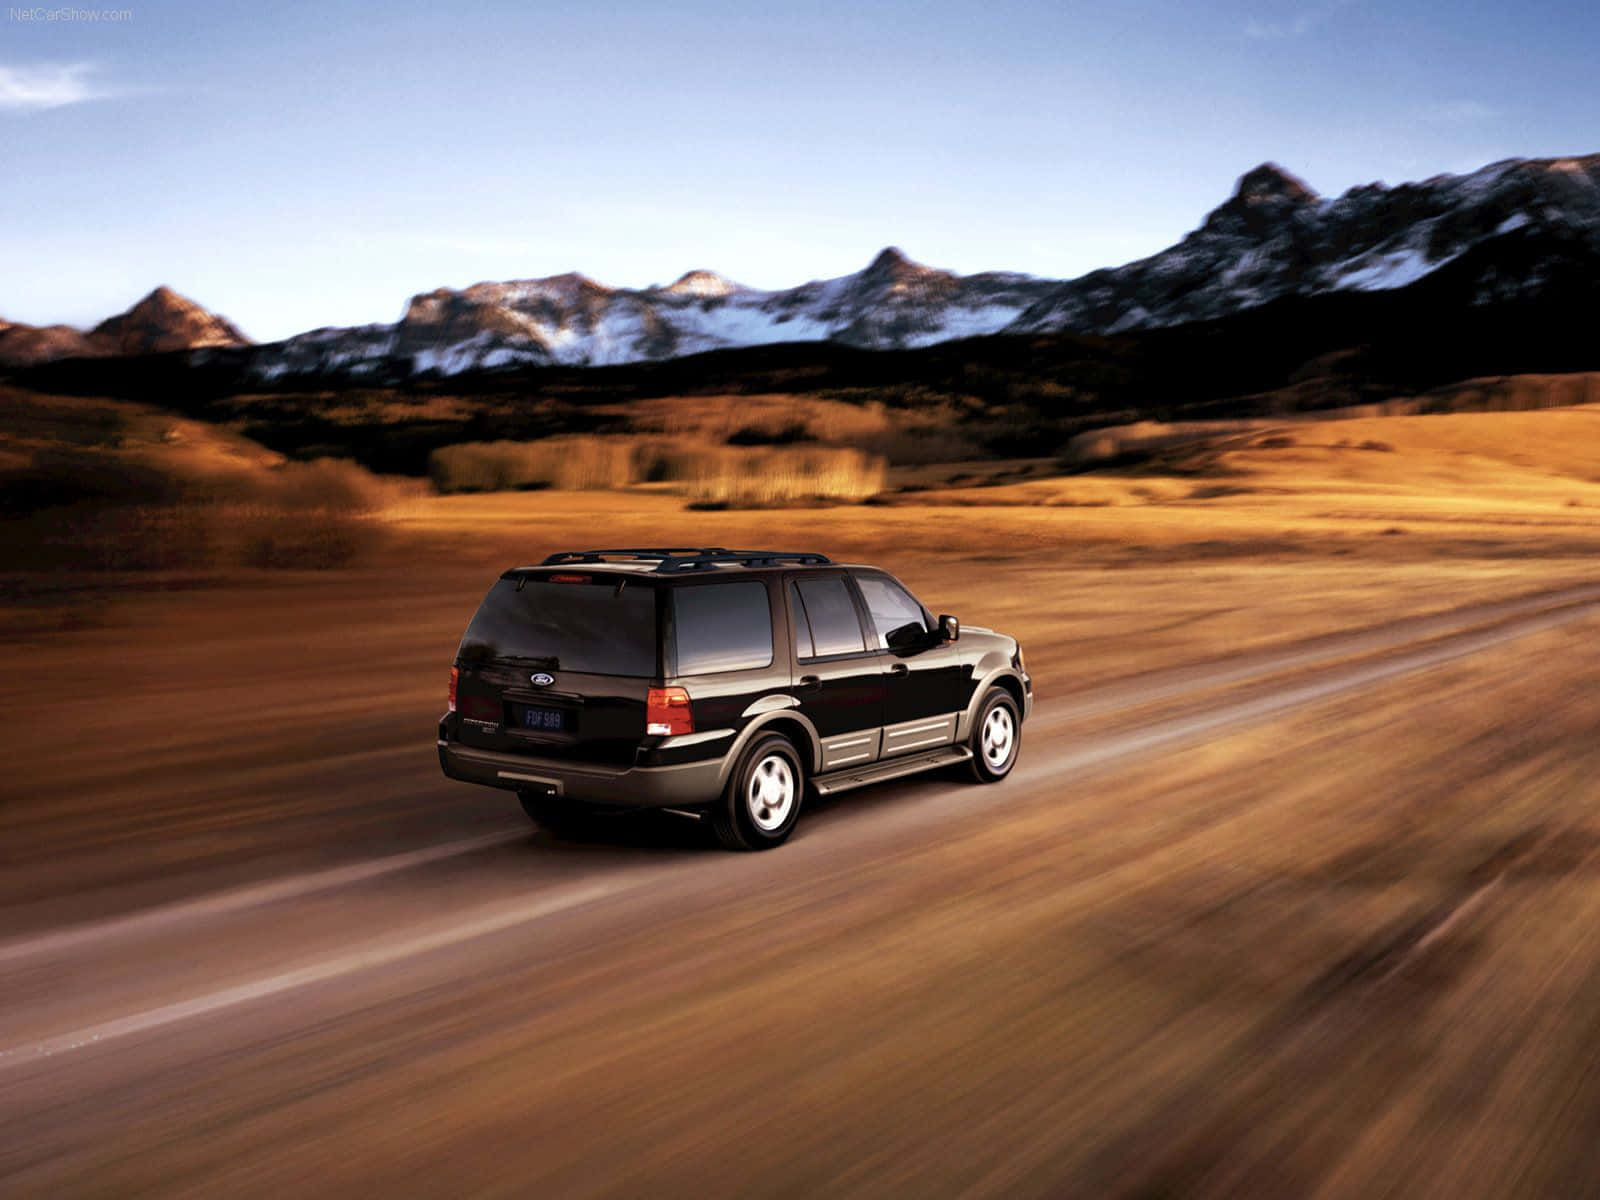 Stunning Ford Expedition cruising on the open road Wallpaper